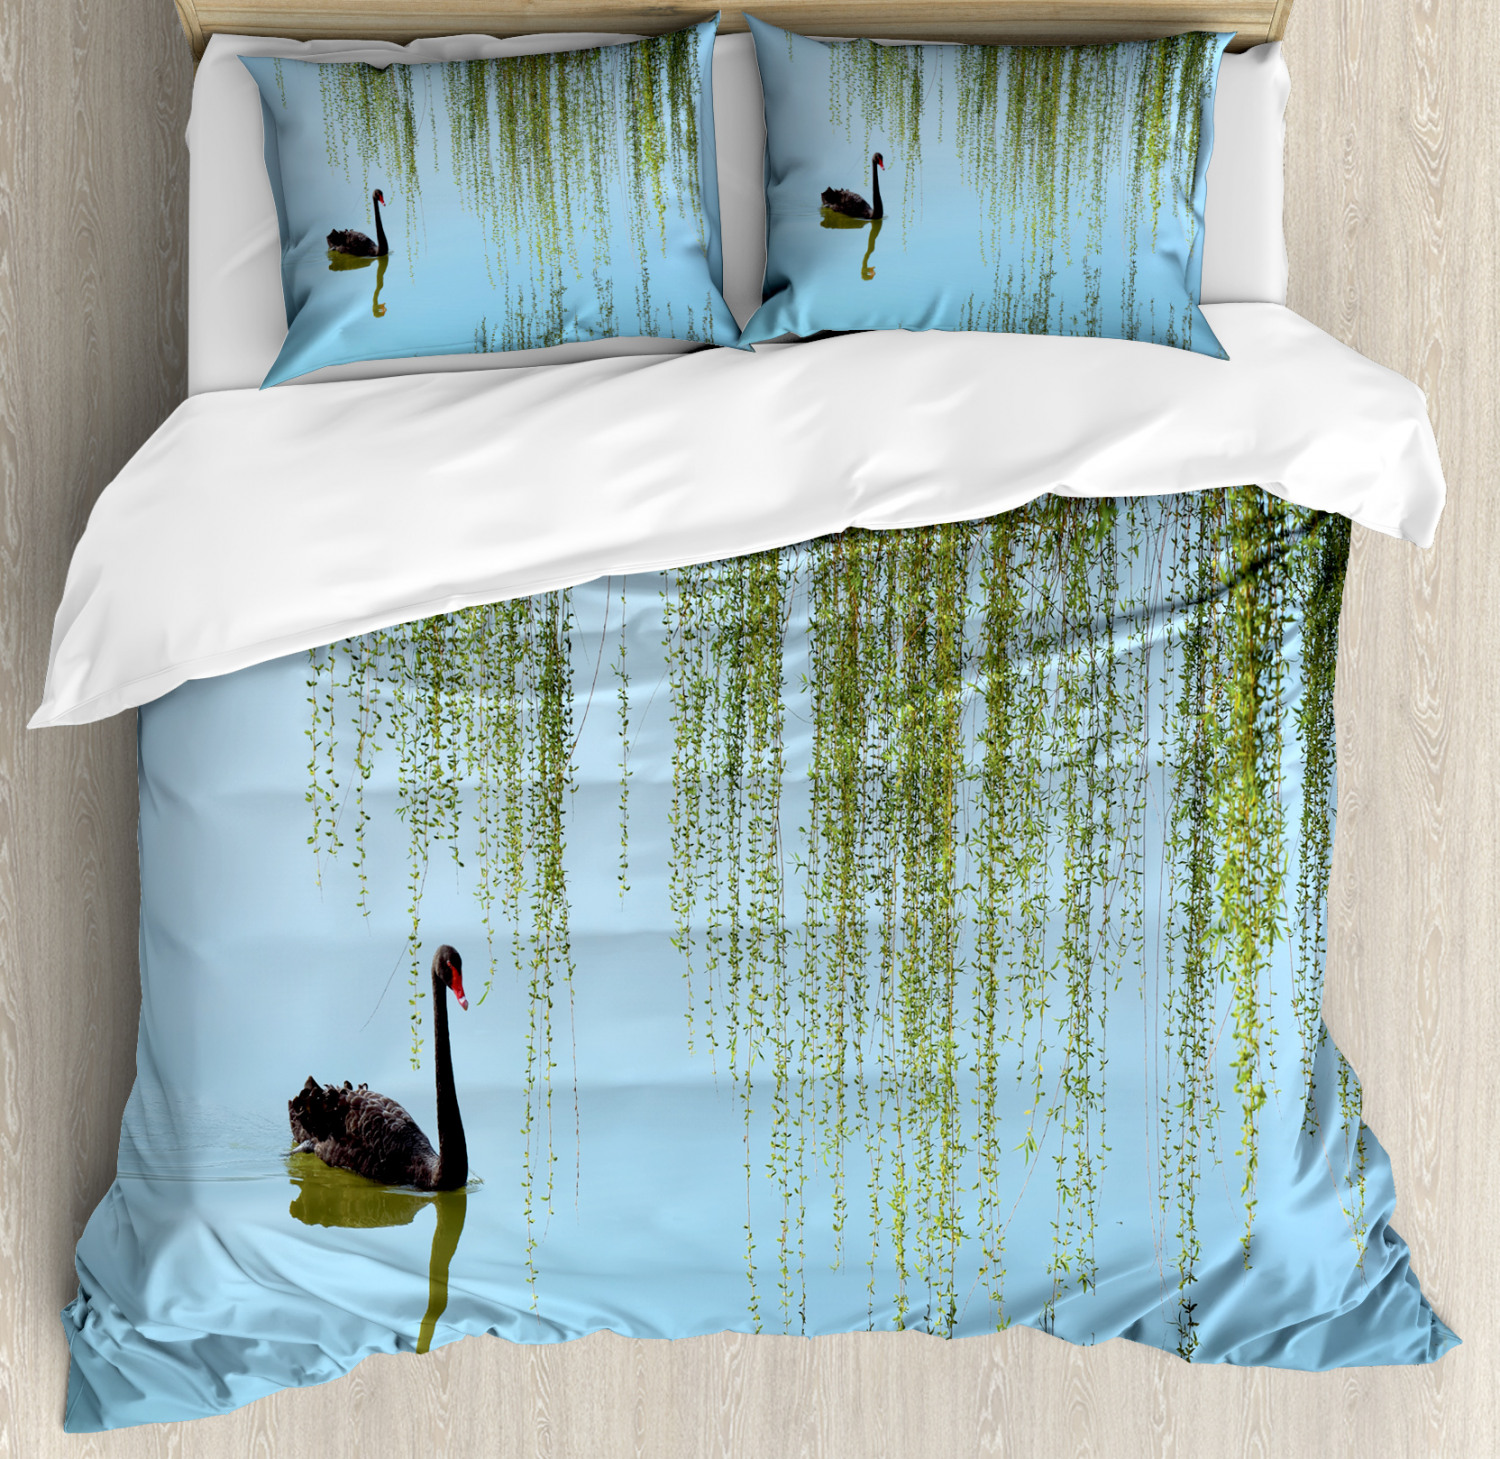 Willow Tree Duvet Cover Set Queen Size, Weeping Willow and Black Swan on the Lake in Spring Peaceful Scenery Theme, 3 Piece Bedding Set with 2 Pillow Shams, Multicolor, by Ambesonne - image 1 of 3